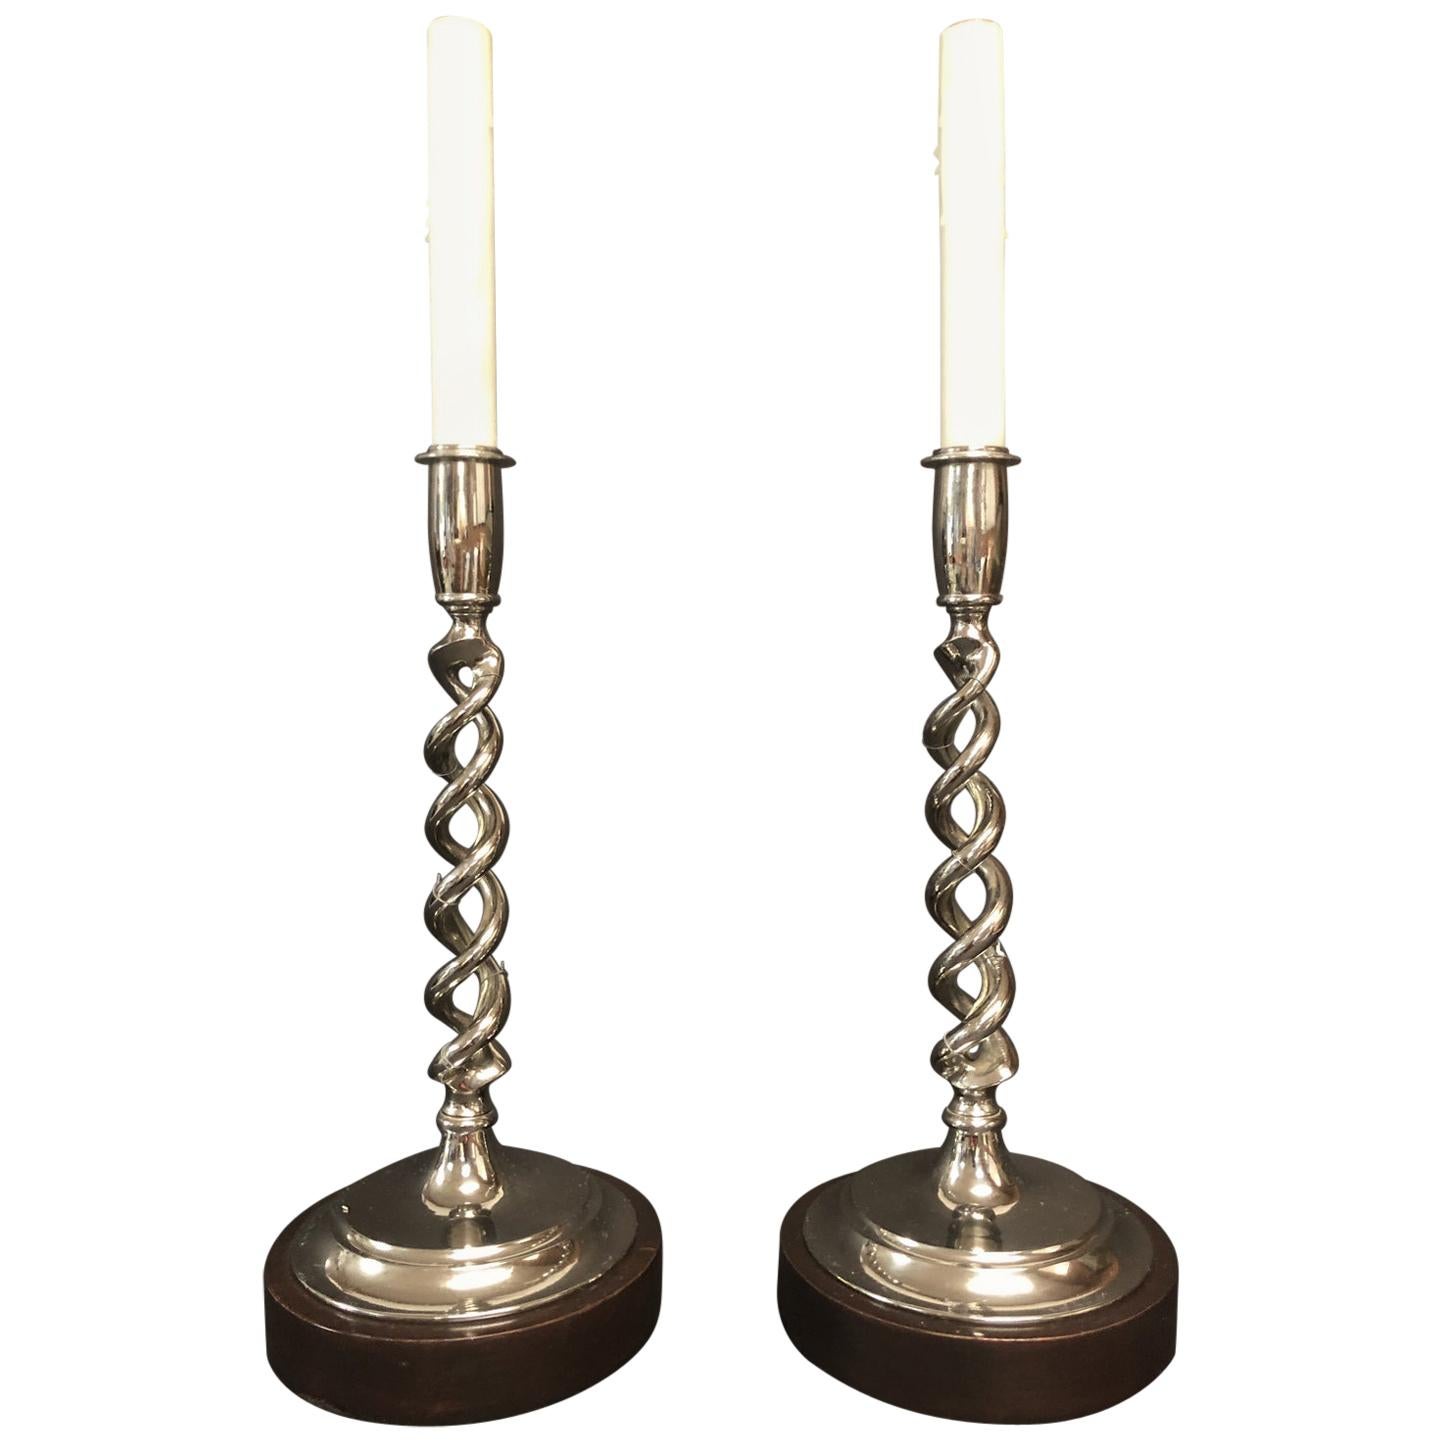 Pair of Open Barley Twist Candlestick Lamps